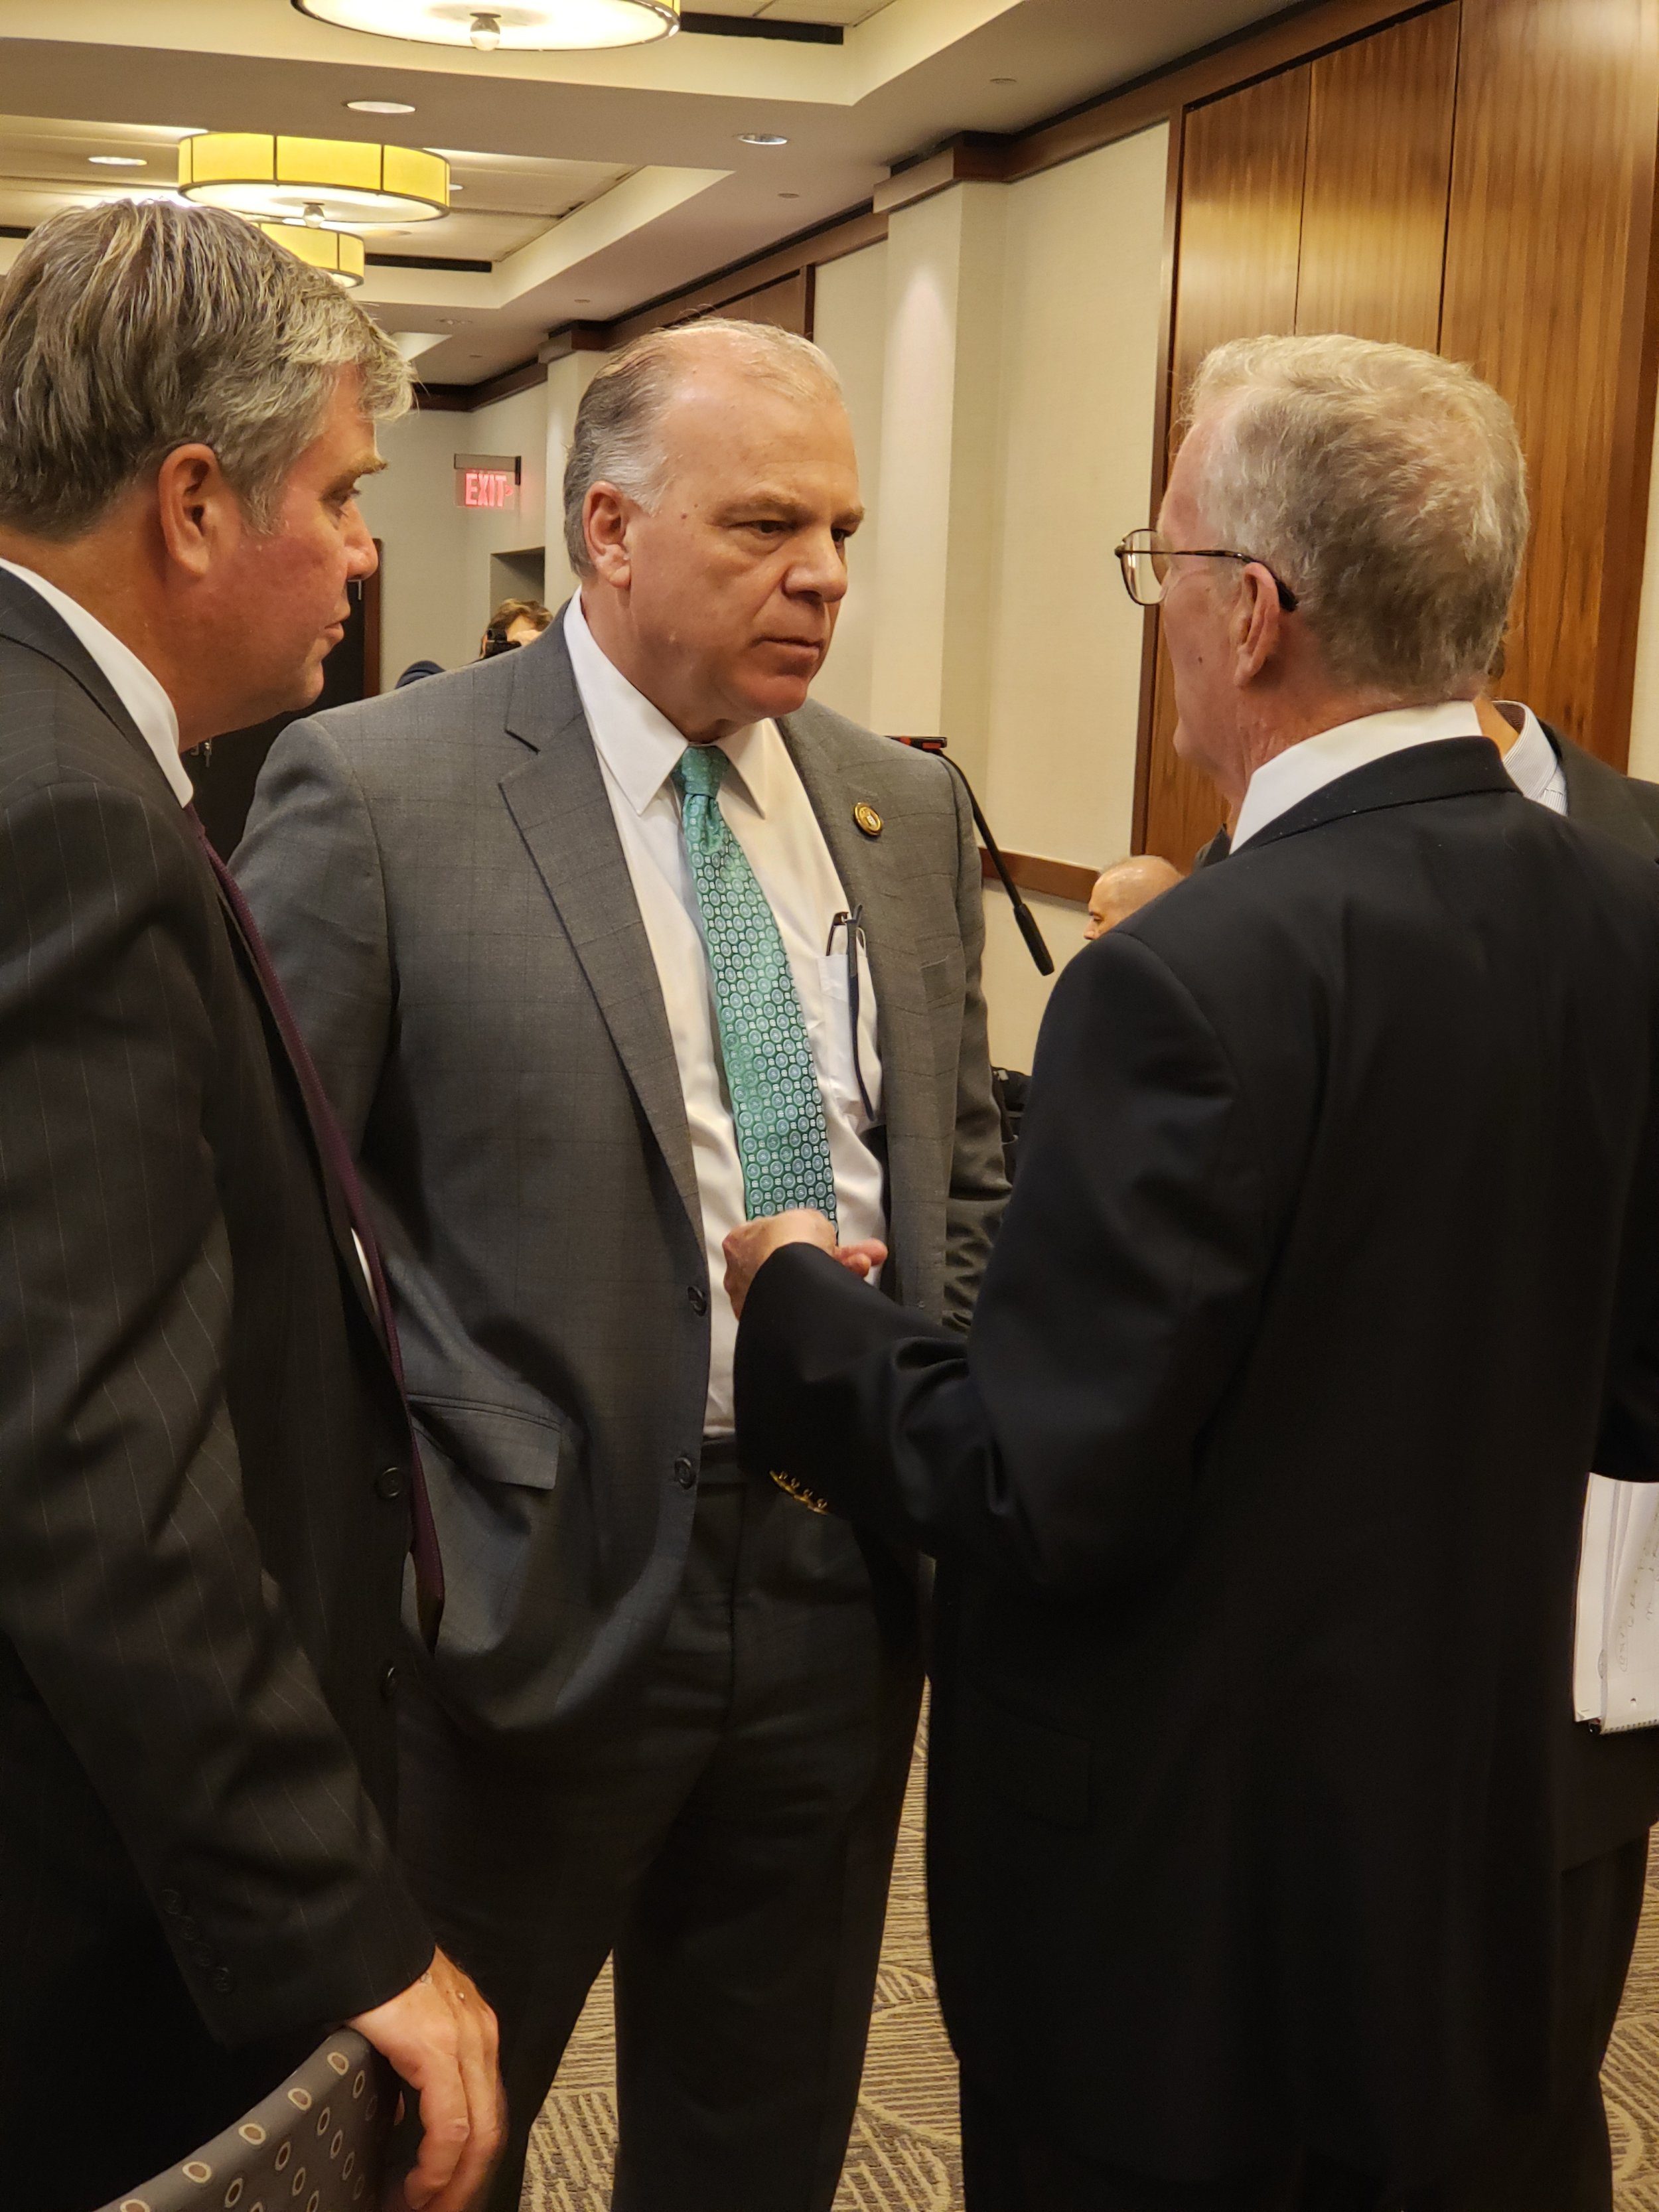 Senate President Sweeney speaks with Tom Byrne (l.) and Tom Healey (r.) co-chairs of the Pensions &amp; Benefits Study Commission